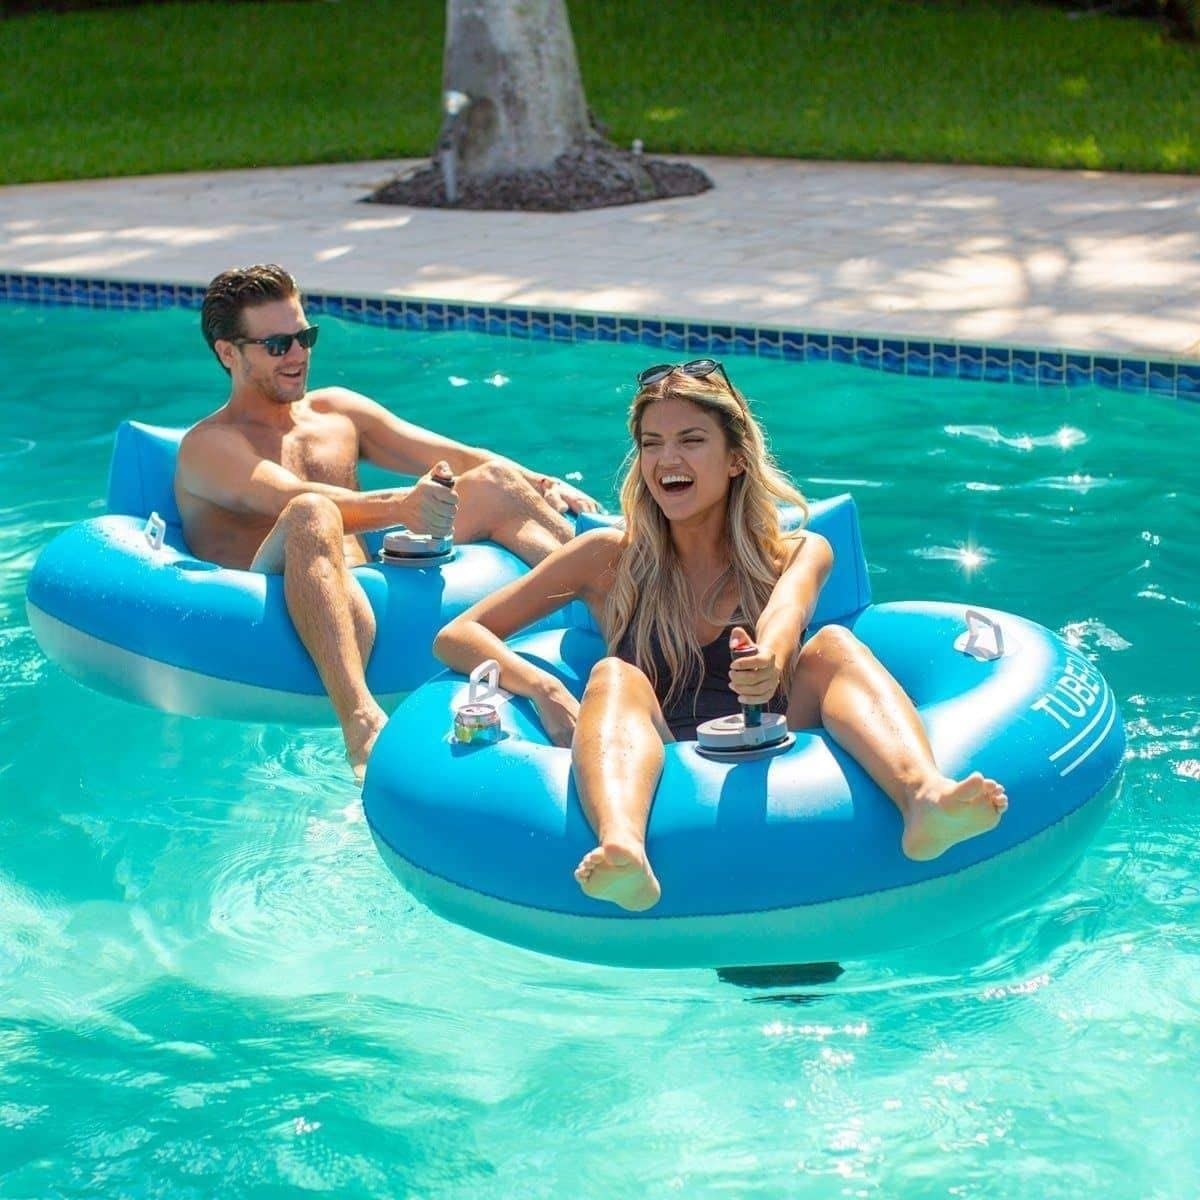 Two people racing each other while sitting in their pool floats. Each float has a controller in the center of the tube.